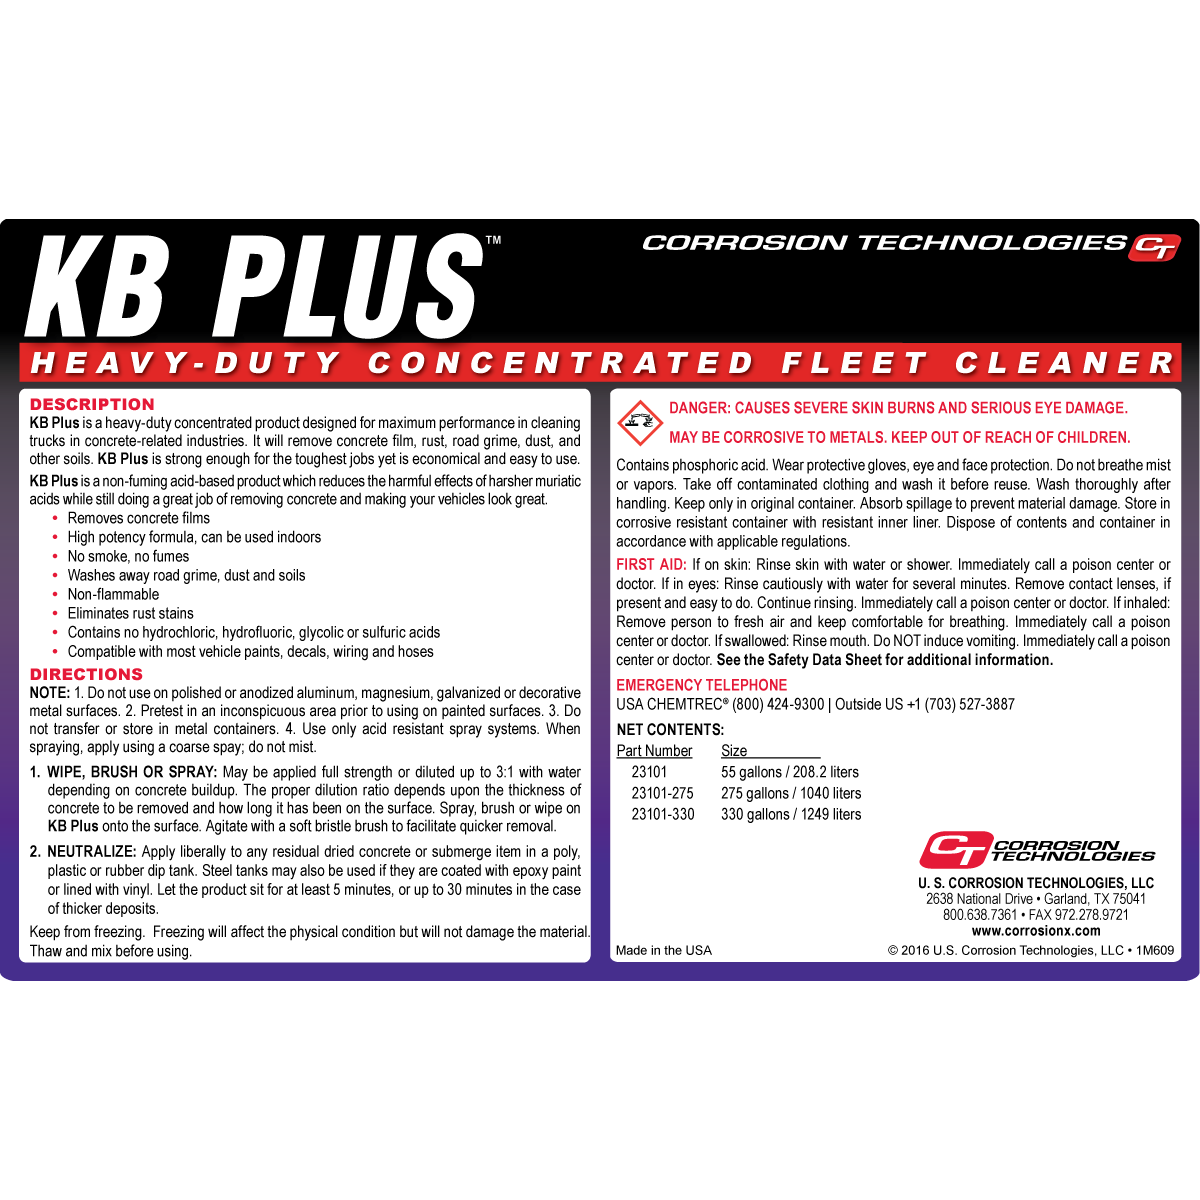 KB Plus heavy-duty, concentrated fleet cleaner